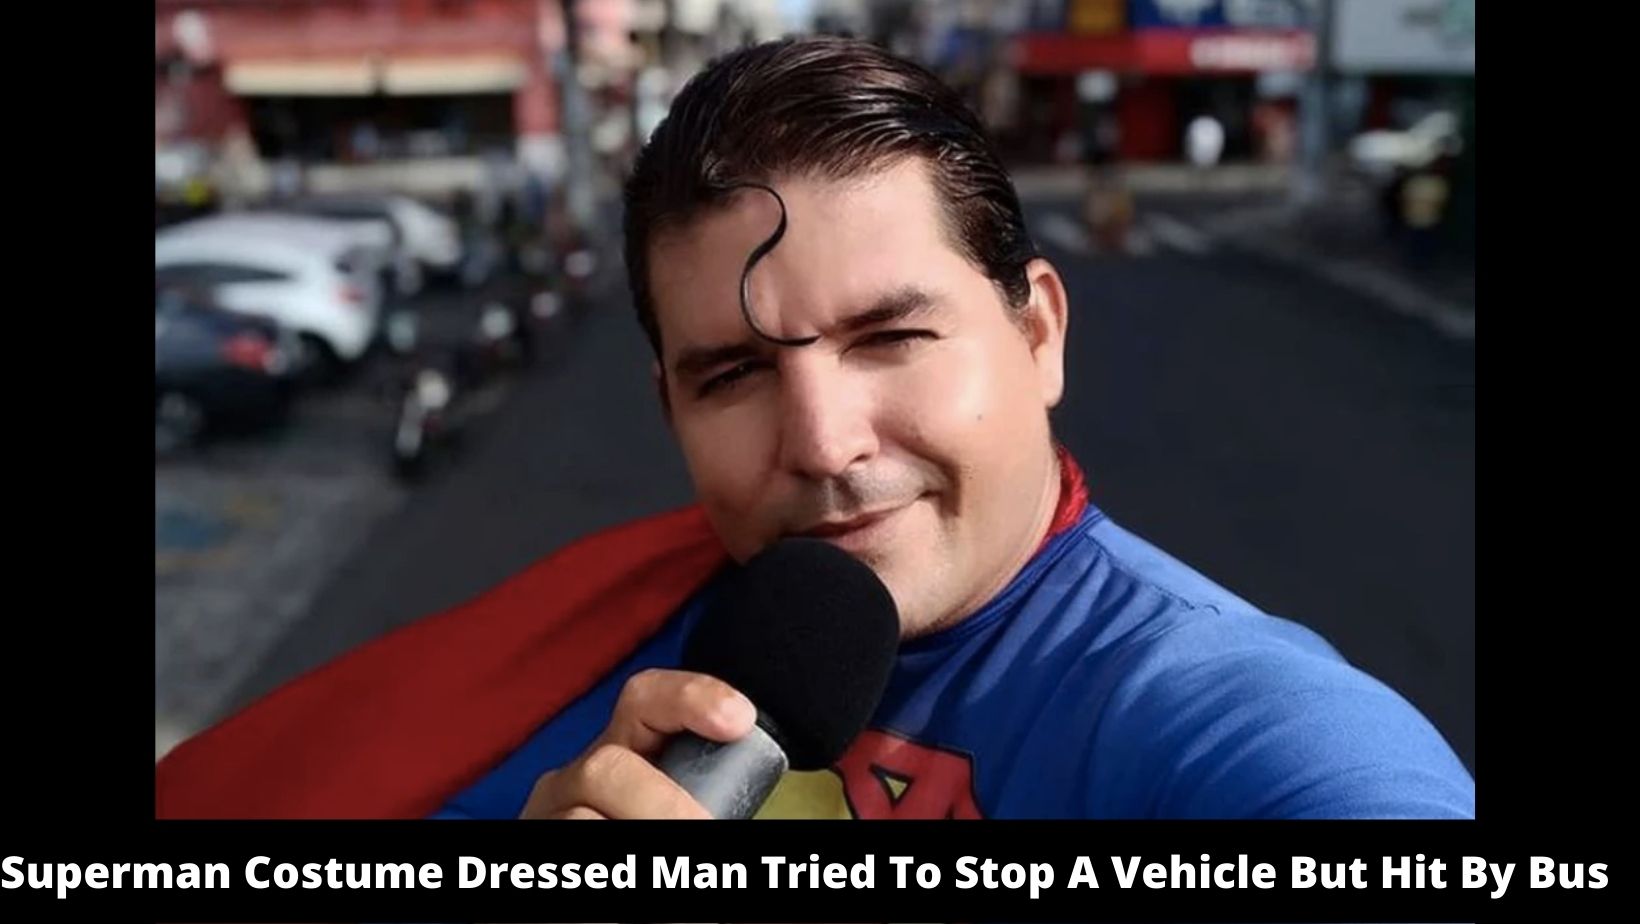 Superman Costume Dressed Man Tried To Stop A Vehicle But Hit By Bus